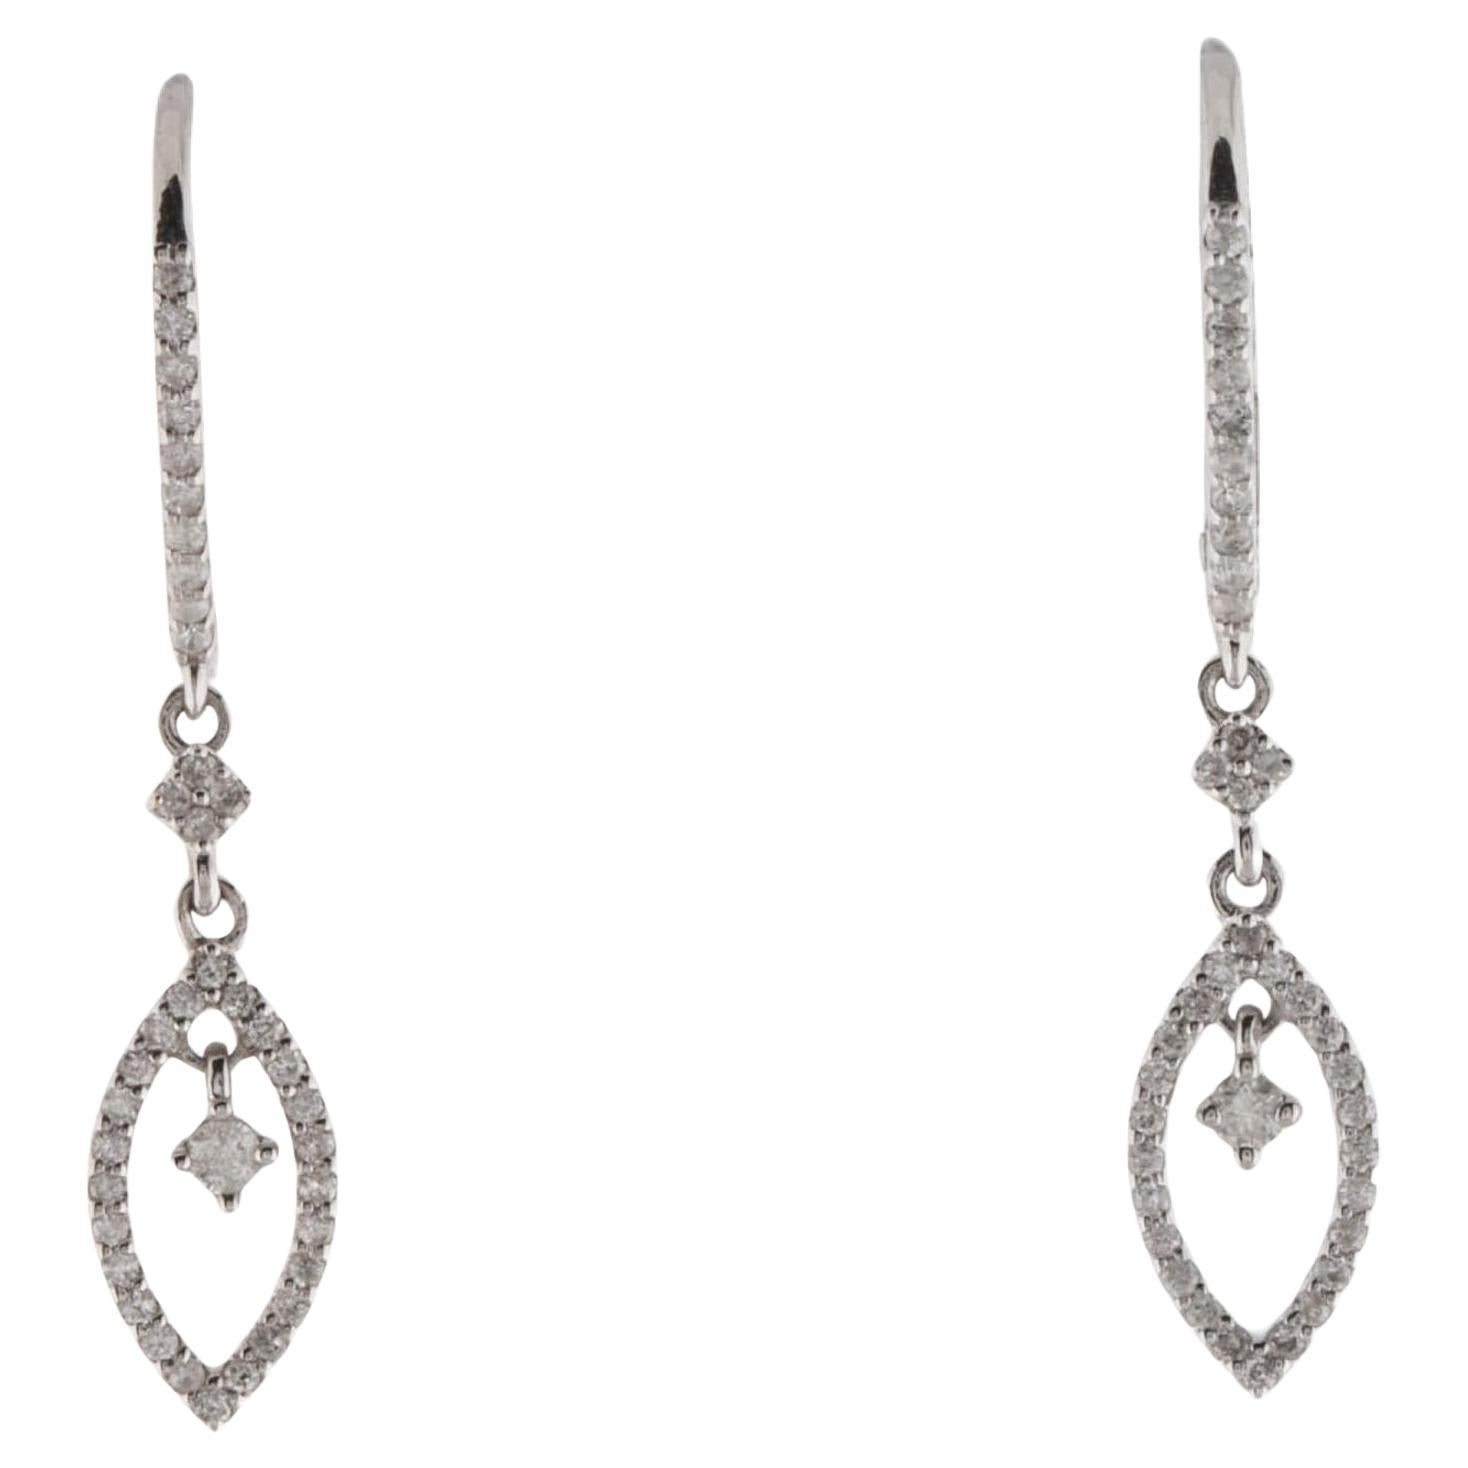 14K White Gold Rhodium-Plated Diamond Drop Earrings - 0.29ct Round Brilliant For Sale